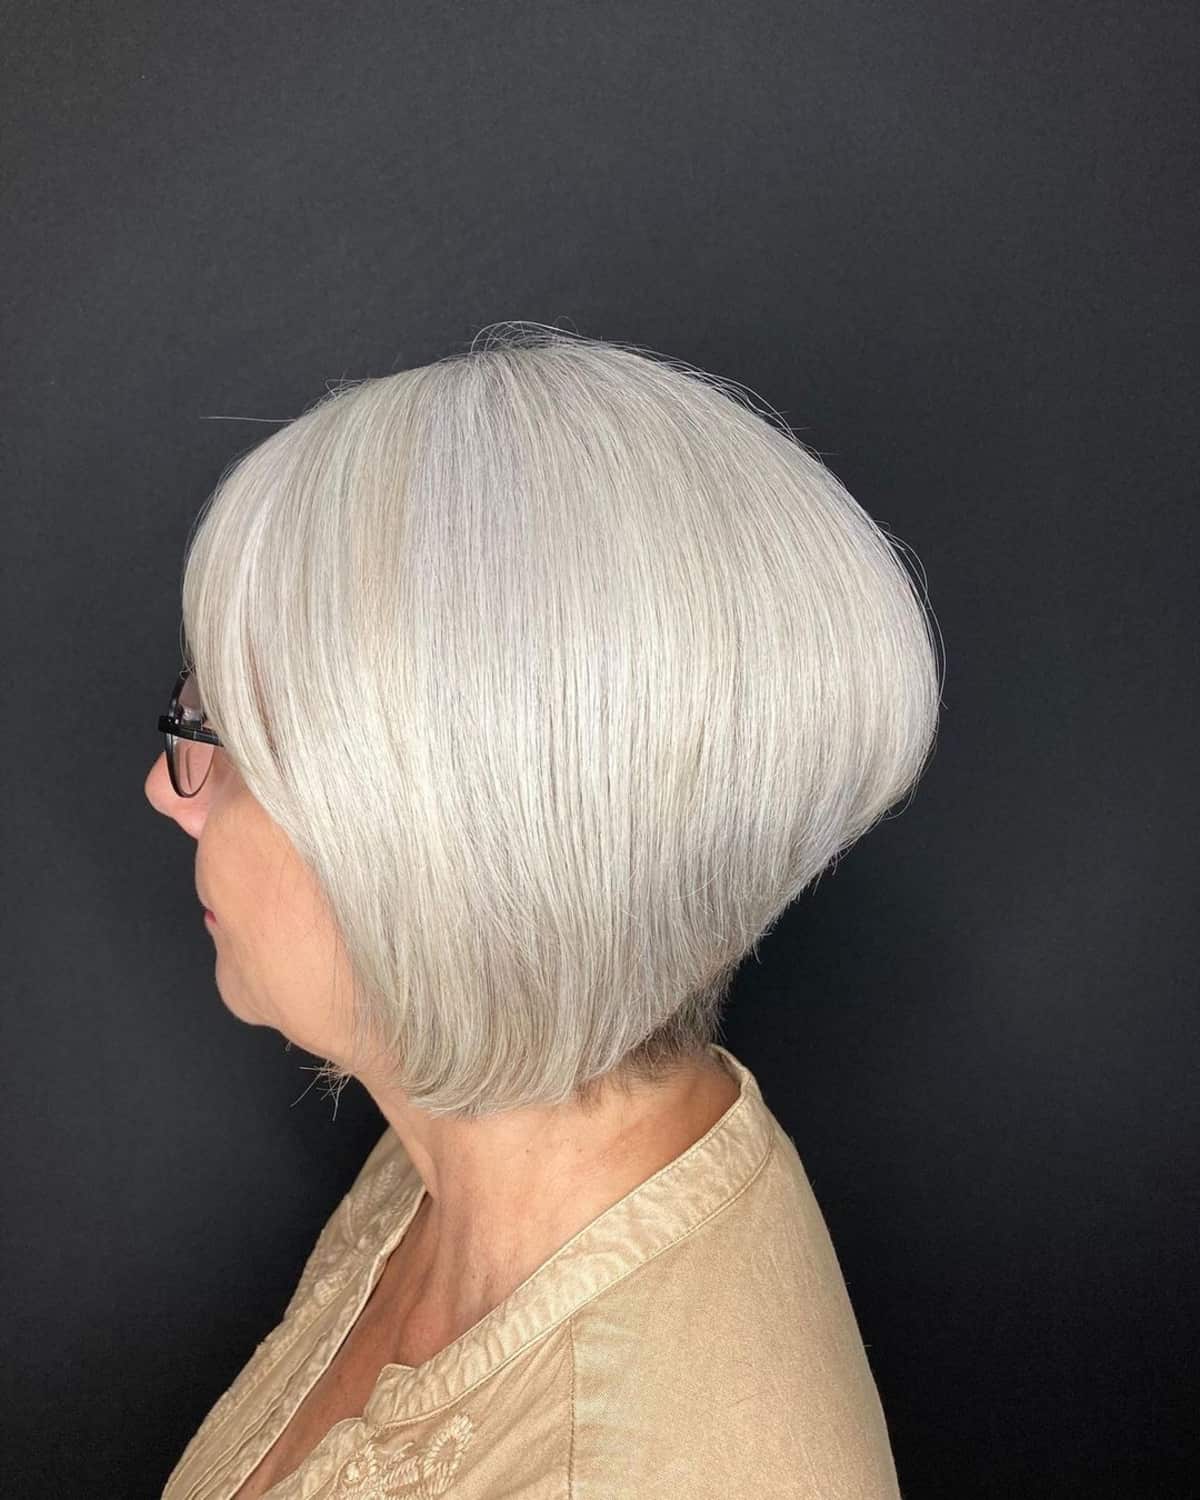 Chin-length graduated bob for women over 60 with glasses